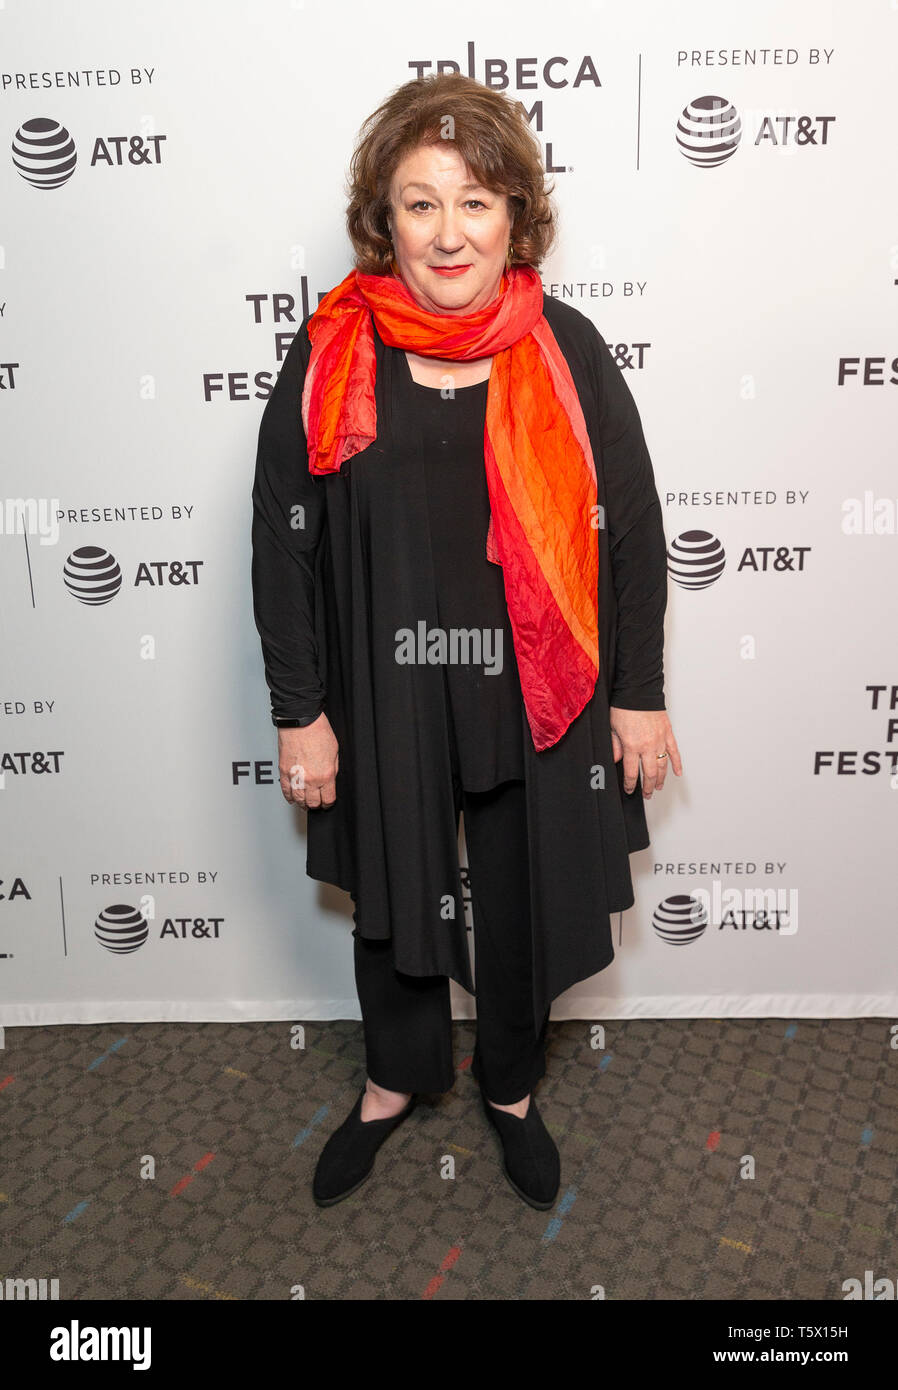 New York, United States. 26th Apr, 2019. Margo Martindale attends the Blow The Man Down screening at Tribeca Film Festival at SVA Theatre Credit: Lev Radin/Pacific Press/Alamy Live News Stock Photo